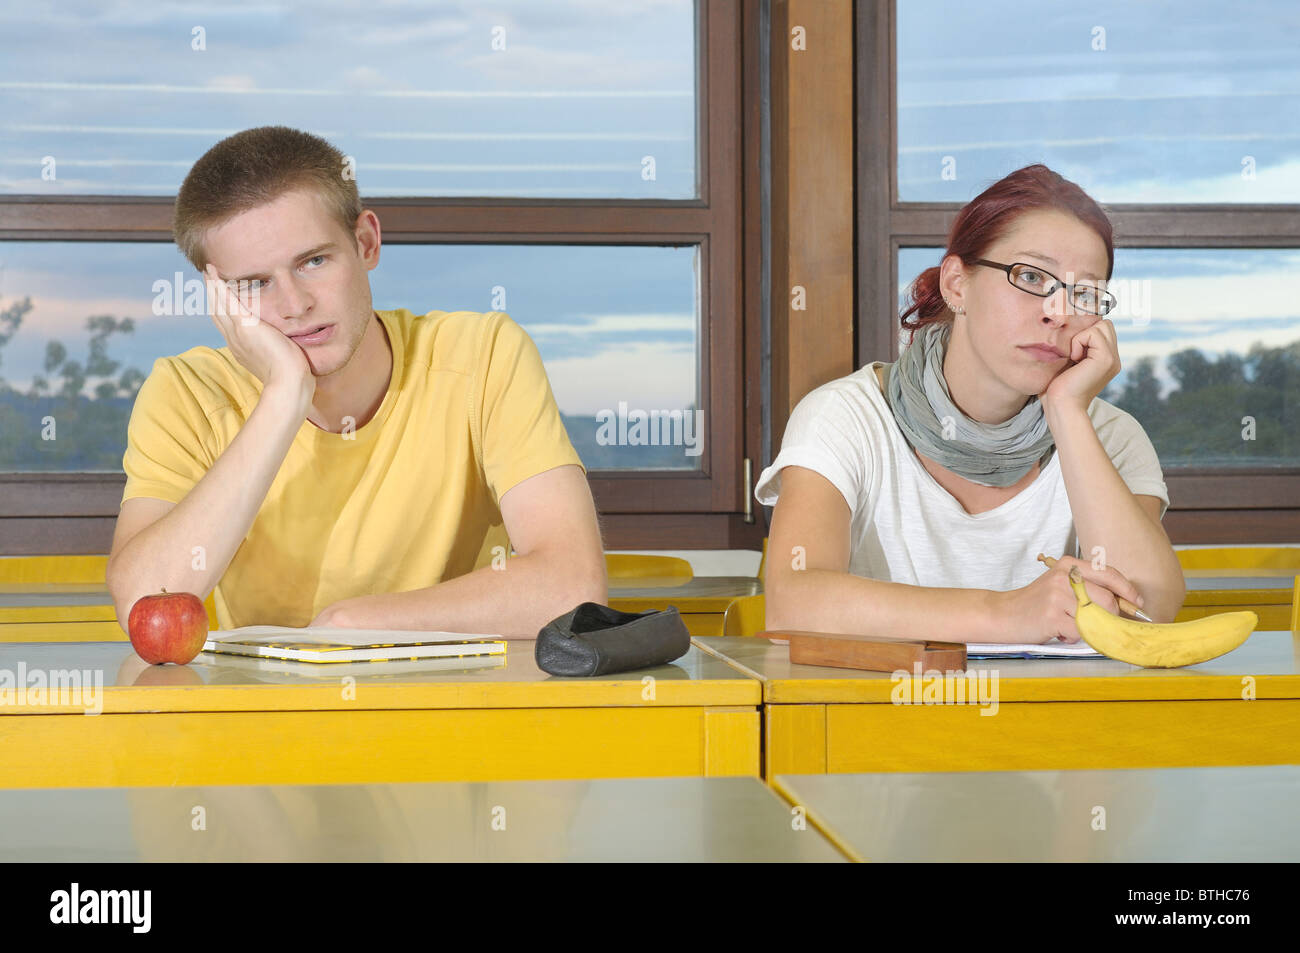 frustrated / bored students in the classroom Stock Photo